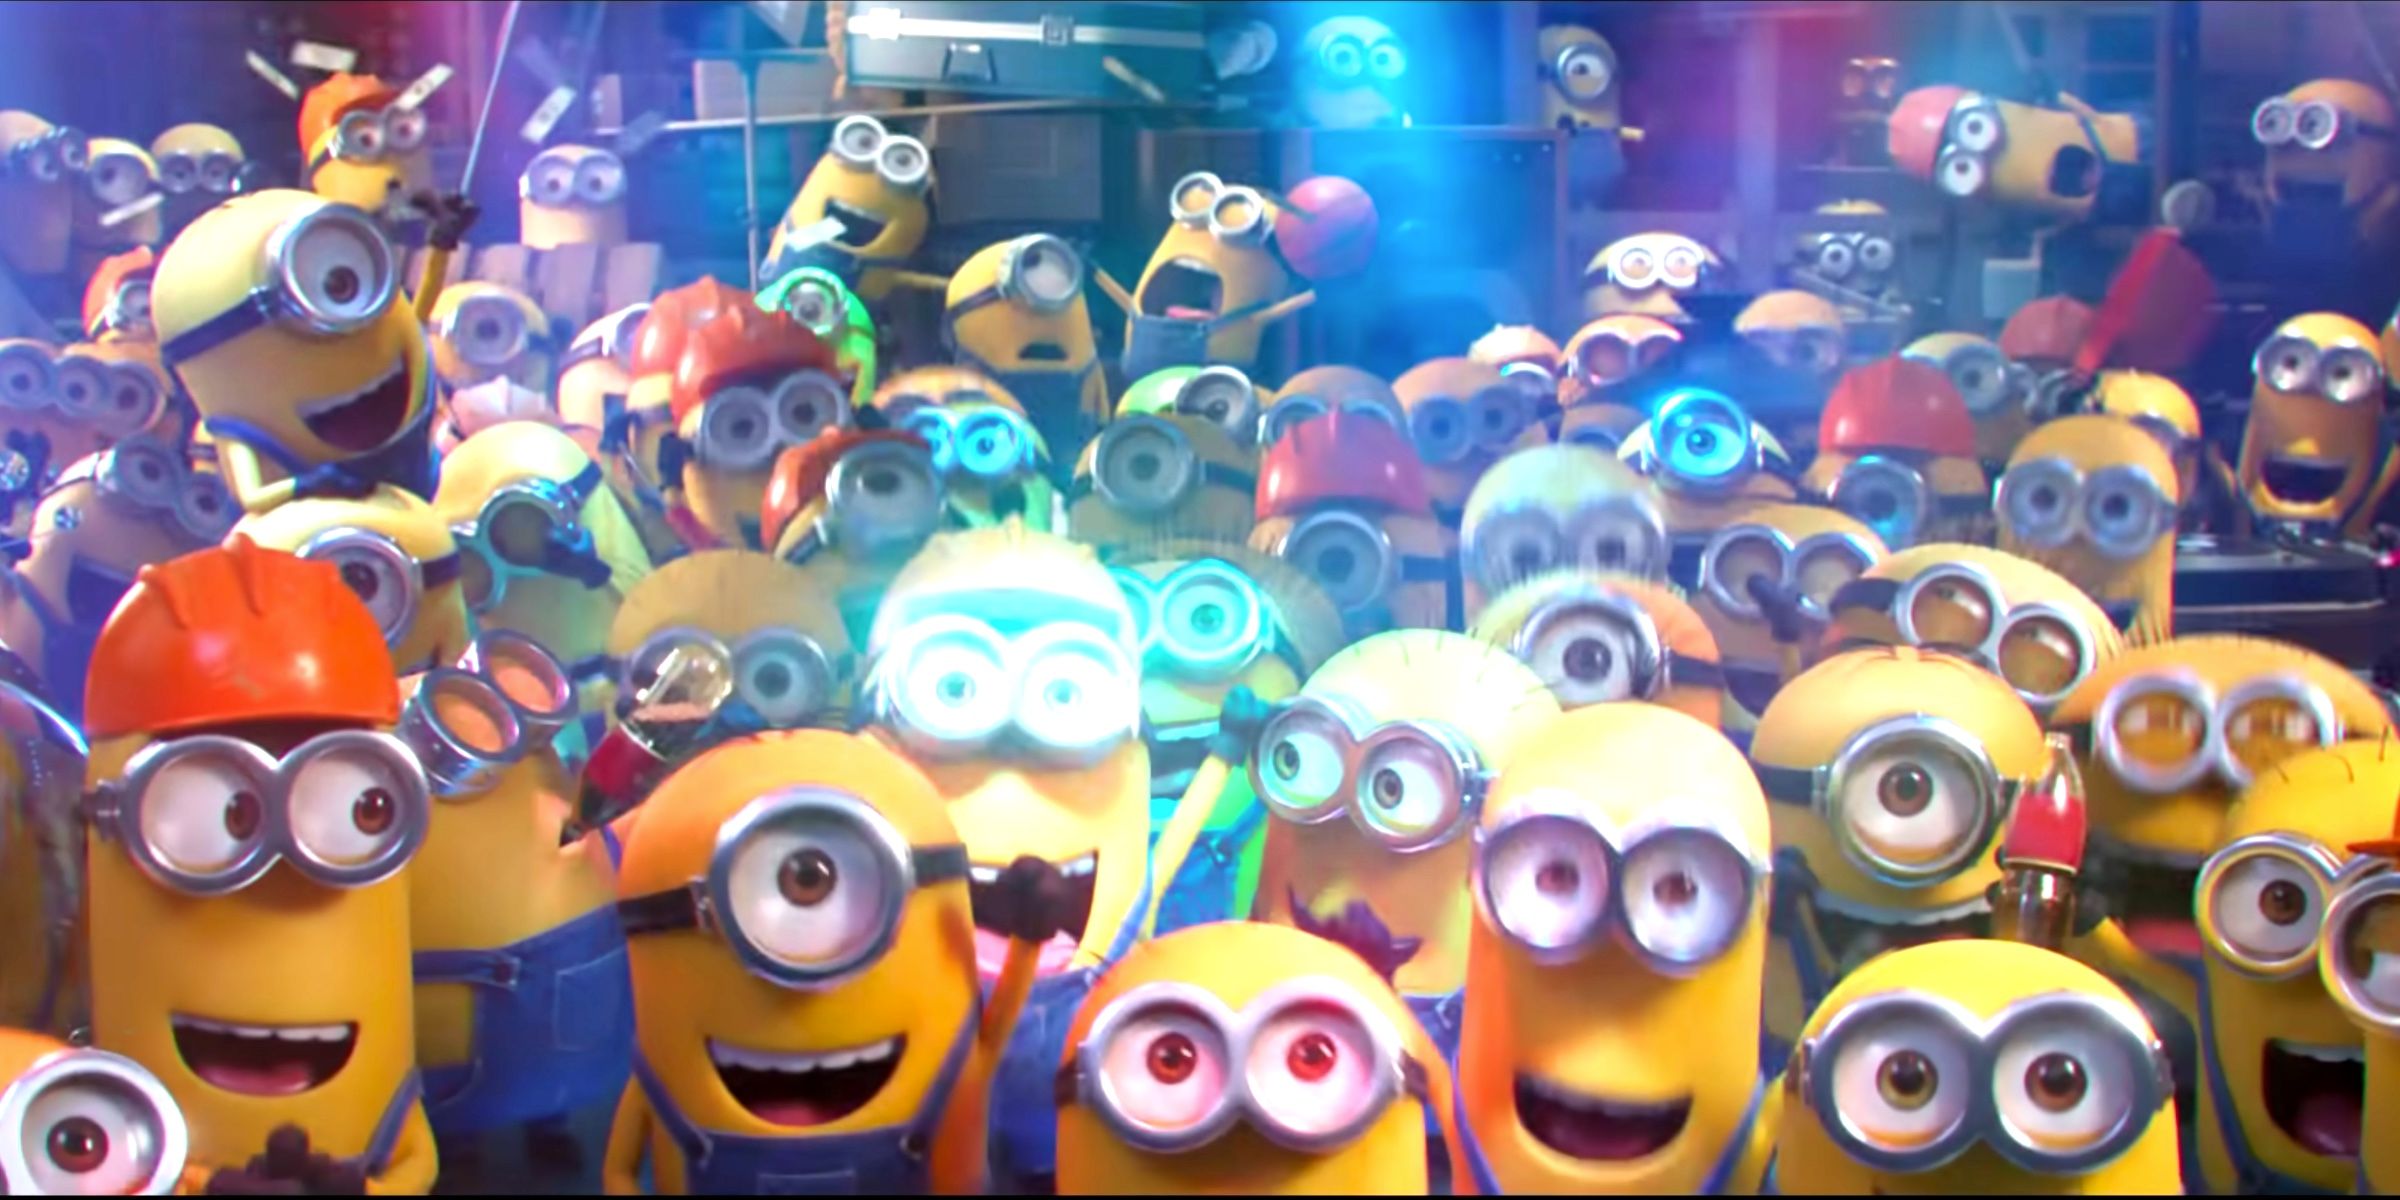 Minions 2 Is The First July Movie To Be Delayed Due to Coronavirus